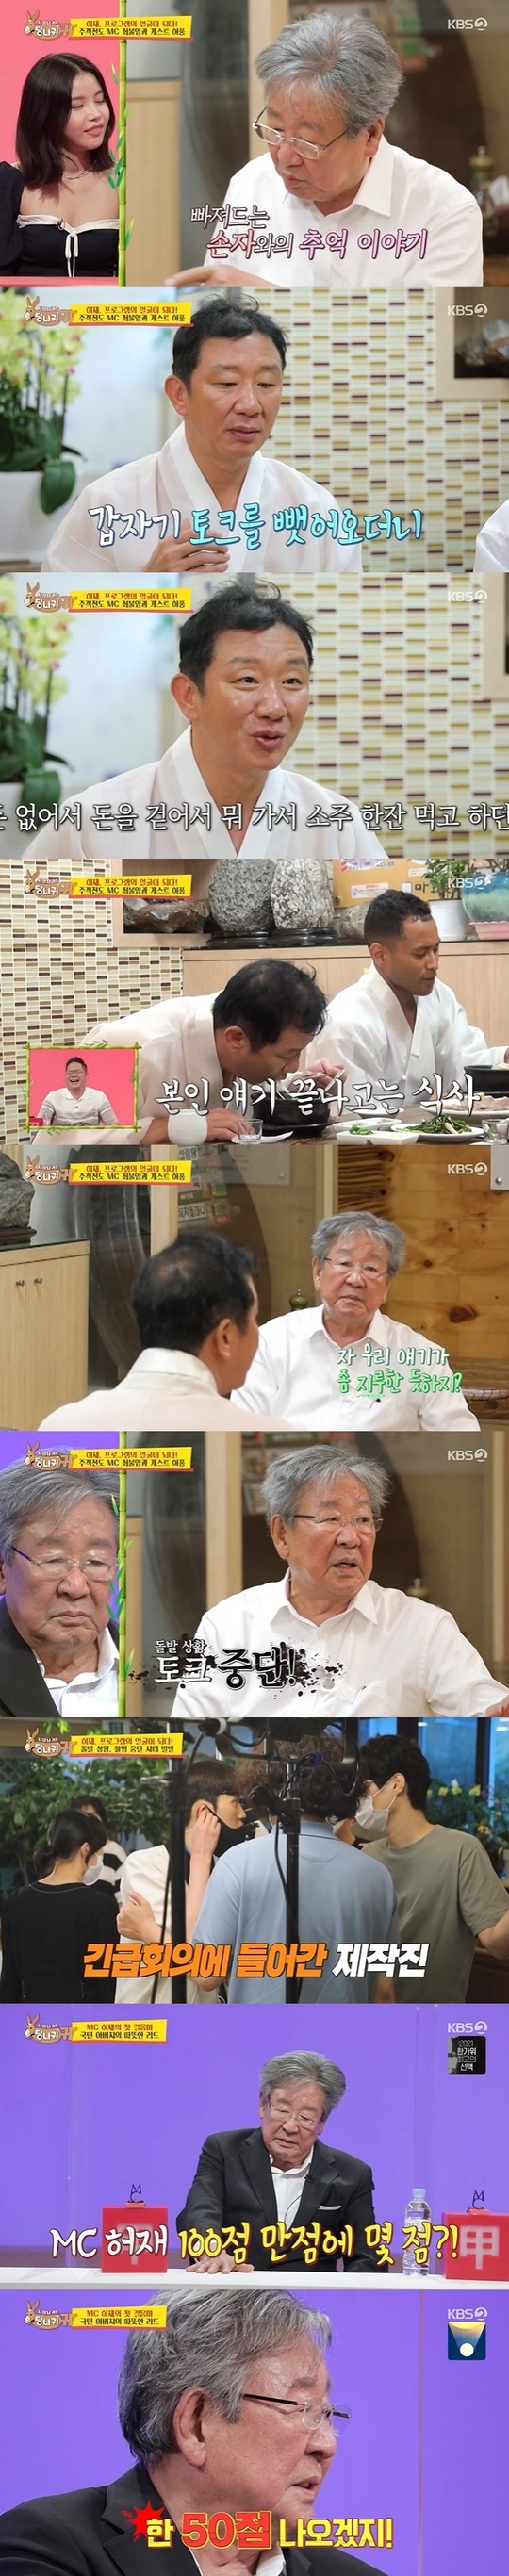 Hur Jae was firmly in the first talk show MC debut by winning the entertainment presidential election Bul-am Choi as a guest.In the 123rd KBS 2TV entertainment Boss in the Mirror (hereinafter referred to as Donkey Ears) broadcast on September 12, it was released to the first filming scene of Hur Jae, who played the first main MC as My Hometown at 12 oclock.On this day, Hur Jae started filming at the traditional Seolleungtang house in 72 years. Before the full-scale guest appearance, Kwon Jae-oh PD of the program first sat down with Hur Jae.He laughed, saying, I think I told you about 10 times, when Hur Jae asked once again about the programs planning intentions.He then asked why Hur Jae left the people who were good at talking and asked why he had to go to MC. I did not know that I could not say this to you honestly.Still, he said, I have a lot of MCs who are good at talking internally. There are no MCs who can not speak.I wanted to try a new challenge. Kwon Jae-oh, PD, was a big hit or a big hit.It was revealed that Hur Jae also made his own efforts for the first filming.Hur Jae was the first guest on the day, and Hur Jae expressed his tension that he had a representative of the entertainment industry, which he usually admired.Guest was the Bul-am Choi.According to Hur Jae, Bul-am Choi, who was the first performer to appear in the entertainment guest, said somewhat unexpectedly that I received the order from the old days to the director of Hur Jae because of the reception.Explaining that there is a past relationship with Hur Jaes father.Bul-am Choi said, I felt like I wanted my ball to be 0.1% in Hur Jaes good work.However, the full-scale shooting began and began to stretch.Hur Jae frequently closed his speech as the only unspeakable MC in Korea, and Bul-am Choi quickly intercepted his story even when he solved an episode related to his grandson.Hur Jae then focused only on food.Eventually, Bul-am Choi said, Is our story boring? He said to the staff, Its so boring.Bul-am Choi suddenly stopped the filming, suggesting Lets take a break and change the atmosphere. In this atmosphere, the staff entered an emergency meeting.The staff withdrew all of them, leaving only about three cameras, and the re-opened shoot, which was only then Hur Jae told Bul-am Choi: I think you should also take care of your health.My father also had diabetes (he was suffering). I want to see my real father when I meet him. He has been dead for 10 years. The subject also naturally flowed into the home of Bul-am Choi, past athletes and wife stories.